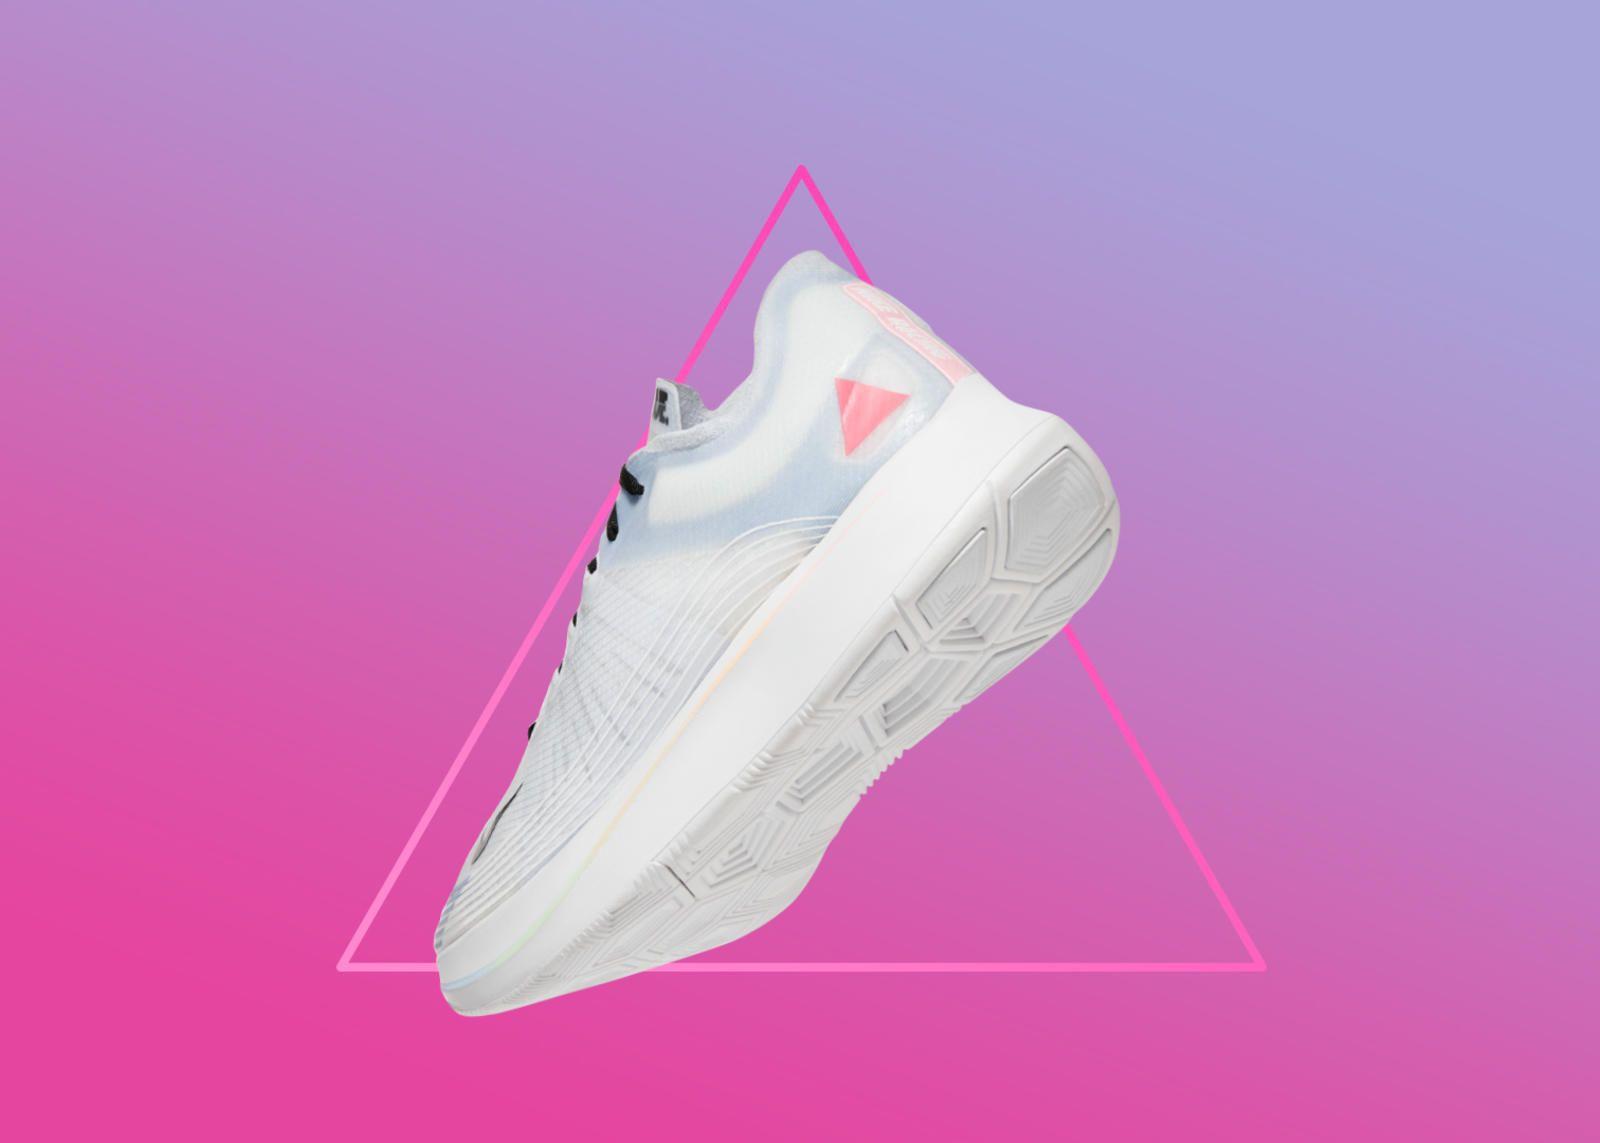 Nike Shoes with the Triangle Logo - Nike BETRUE 2018 Collection